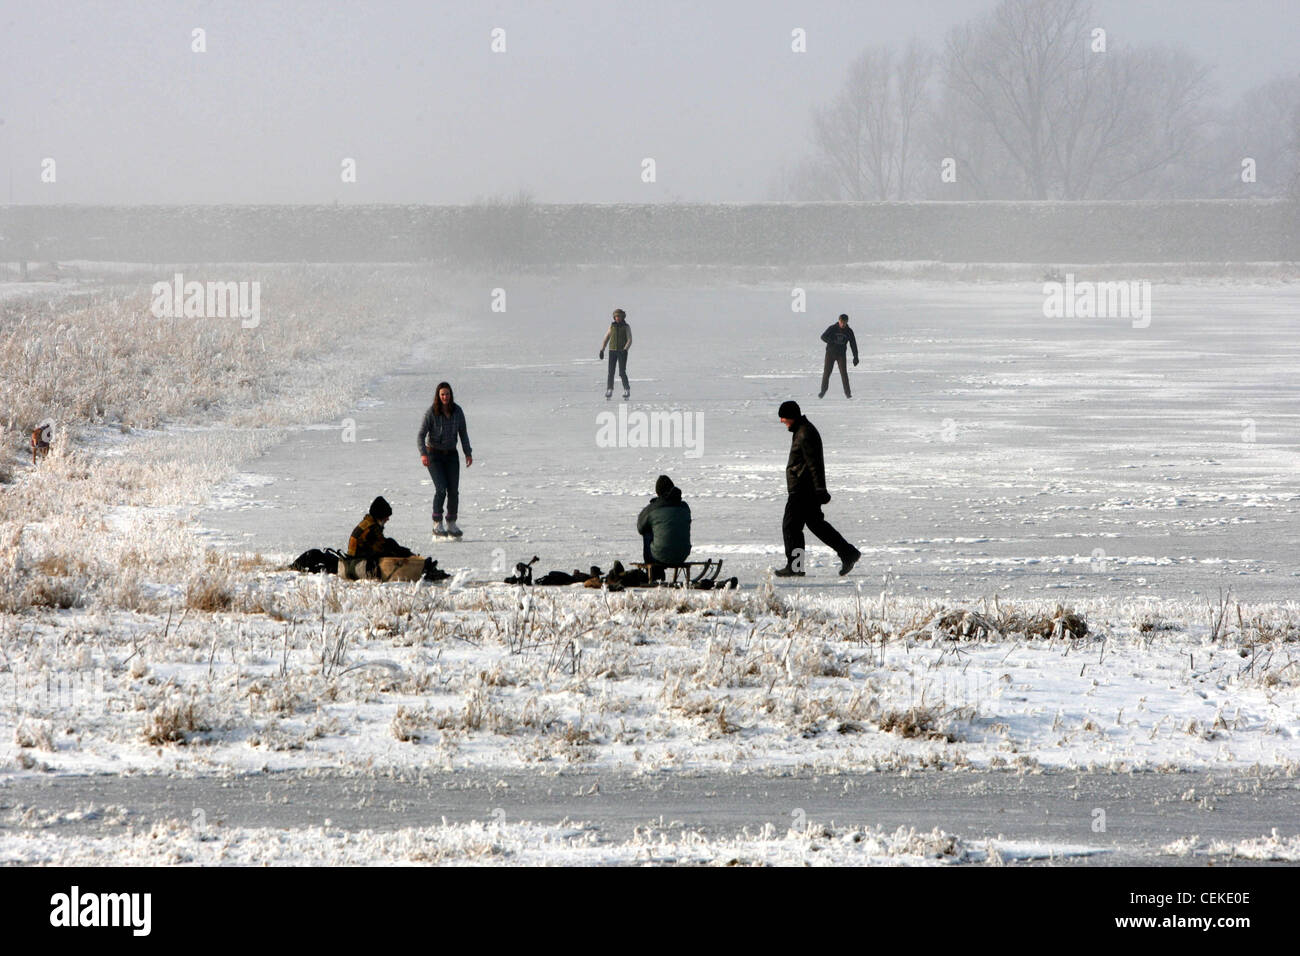 PEOPLE SKATING ON THE FROZEN FENS AT SUTTON GAULT,CAMBRIDGESHIRE. Stock Photo